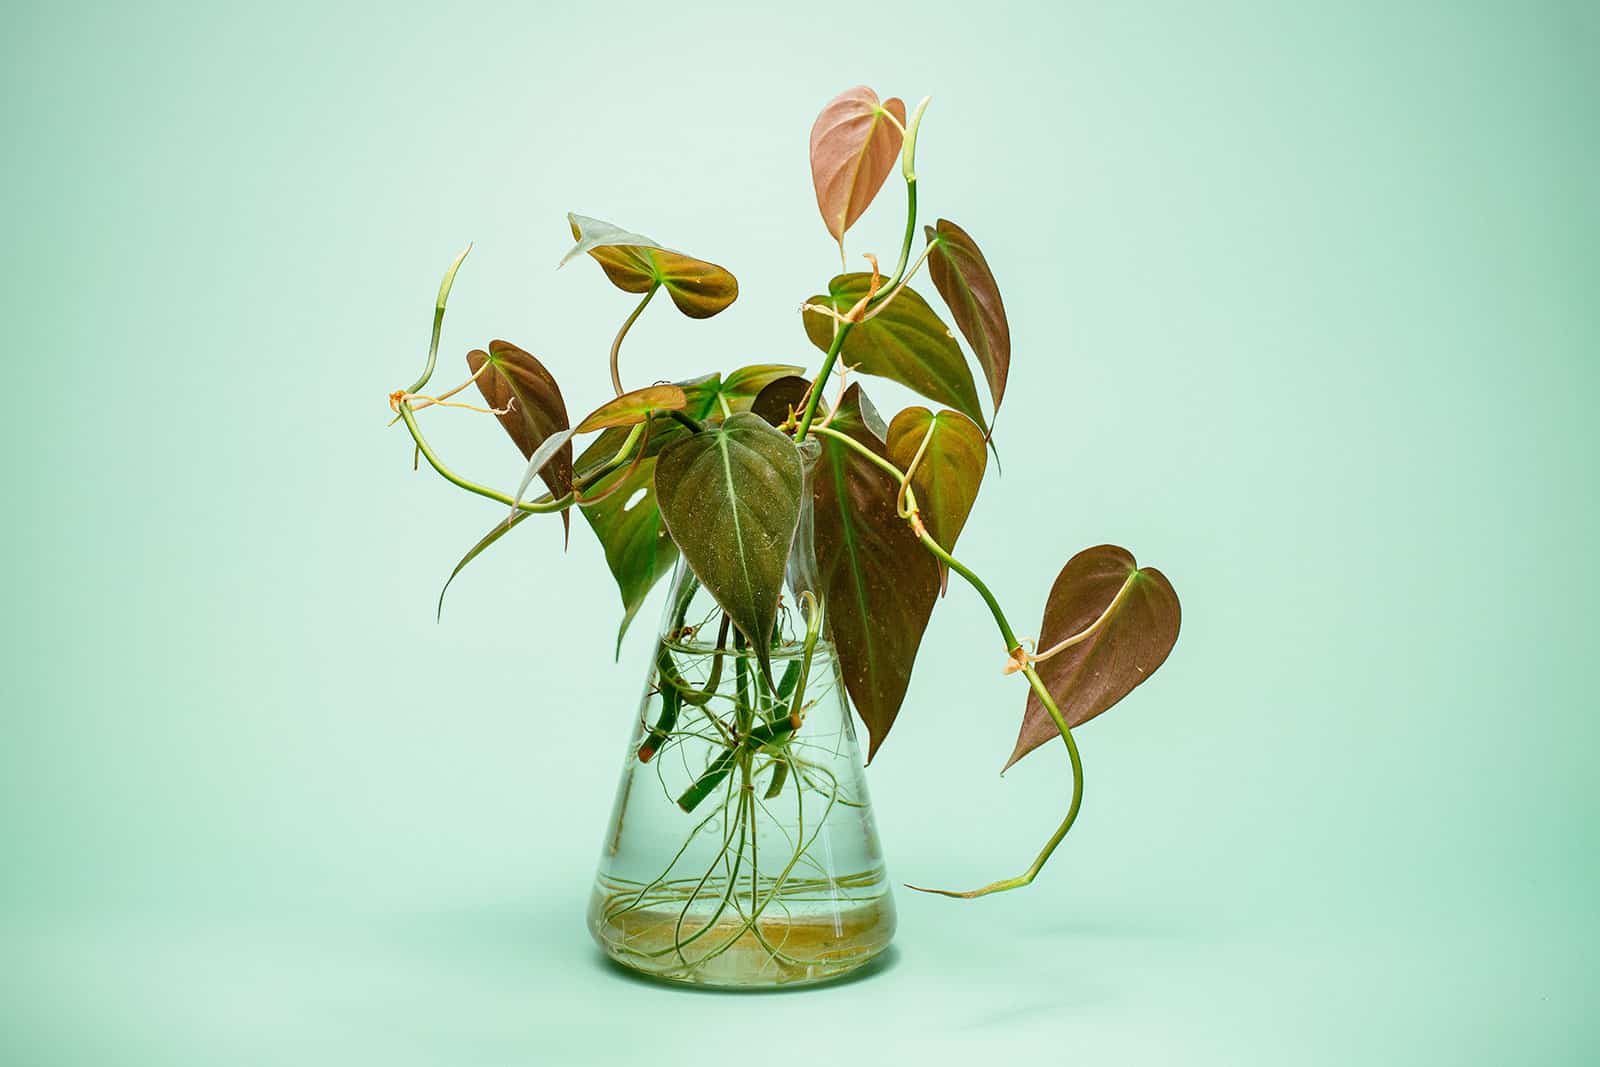 Velvet leaf philodendron growing in water